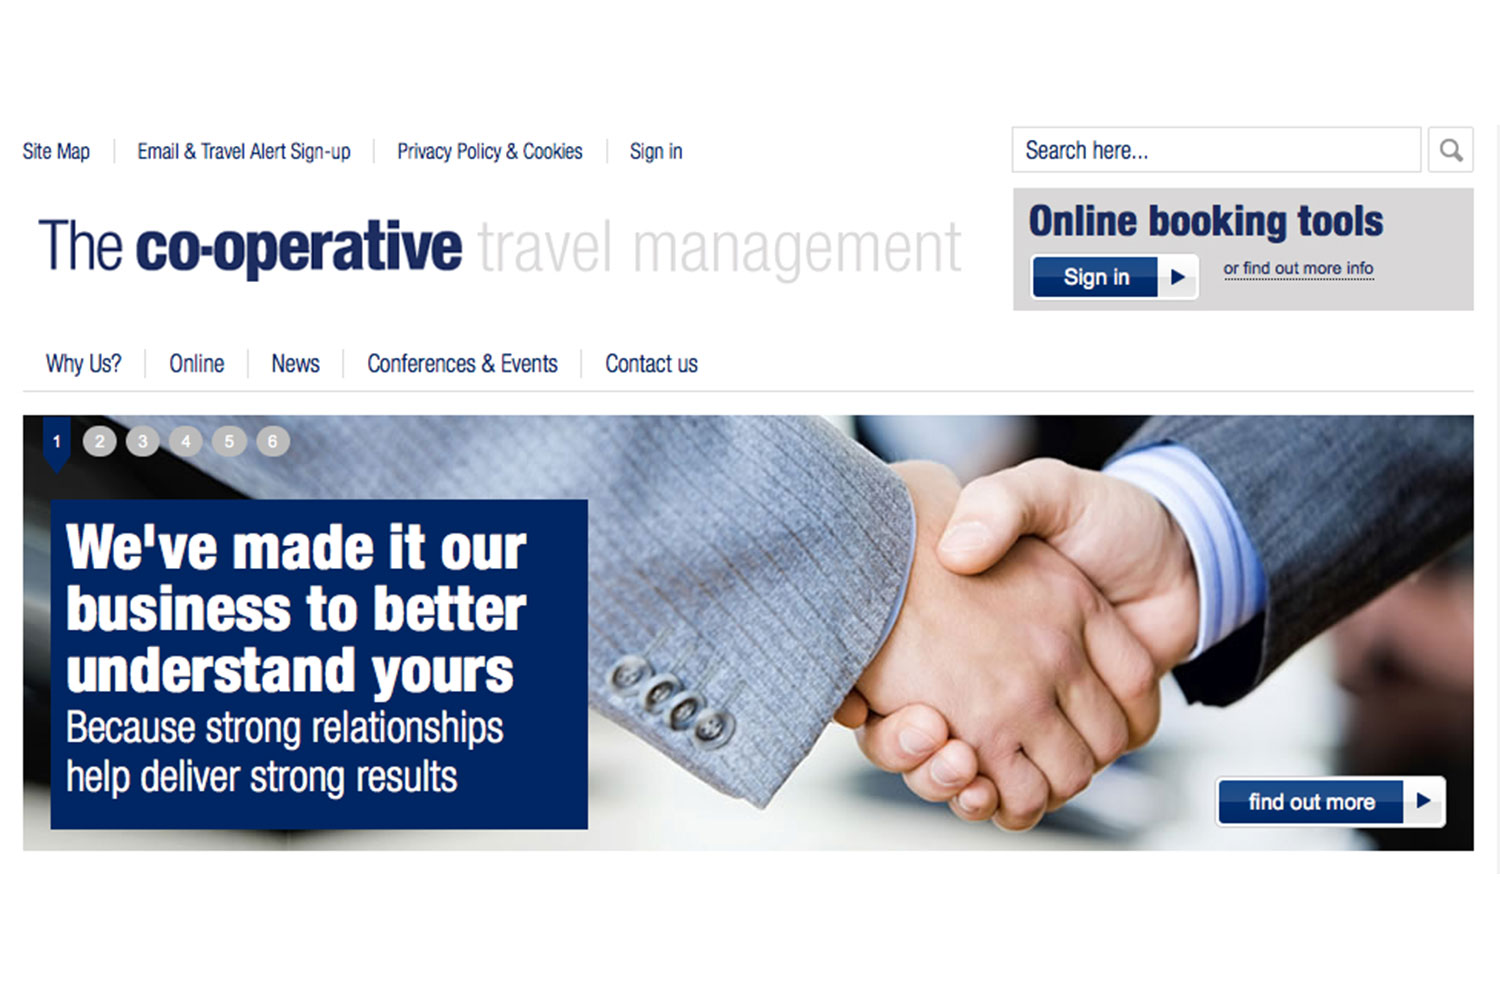 Thomas Cook takes hit on sale of Co-operative Travel Management